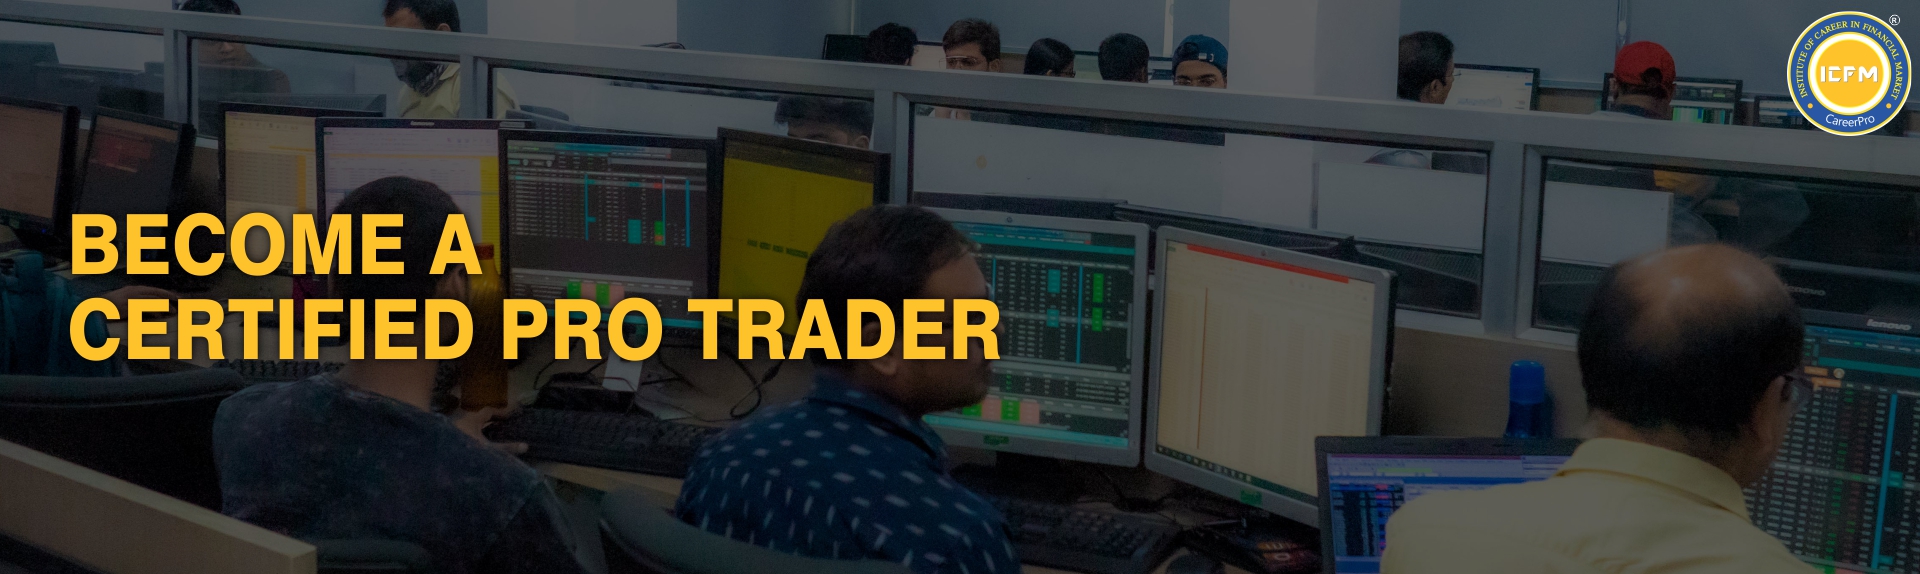 online trading course